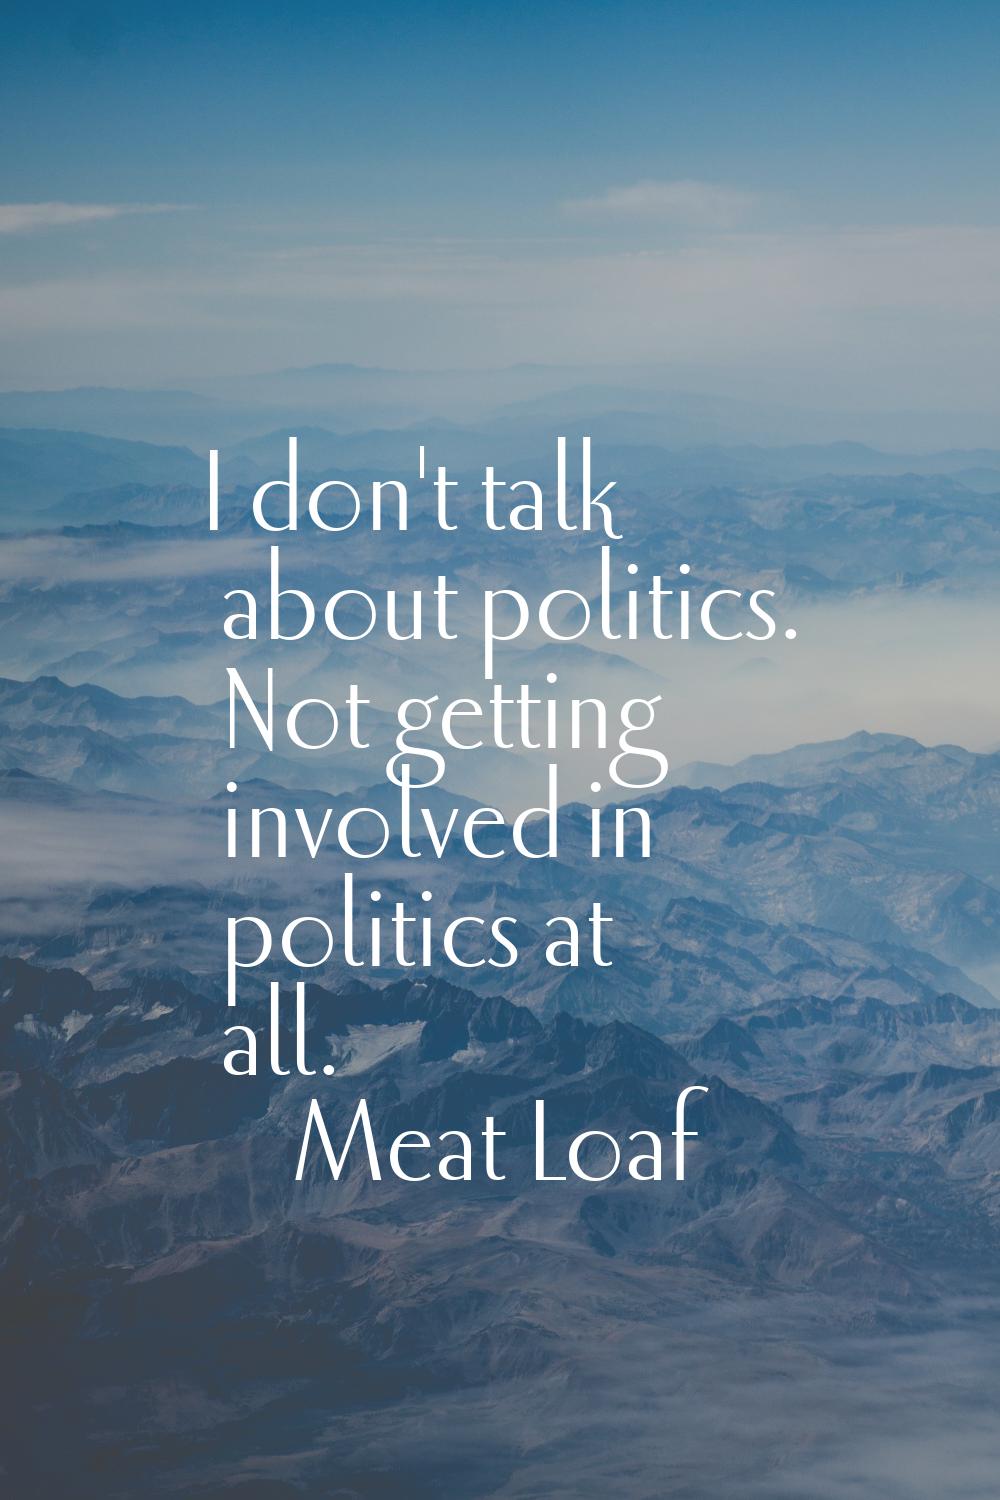 I don't talk about politics. Not getting involved in politics at all.